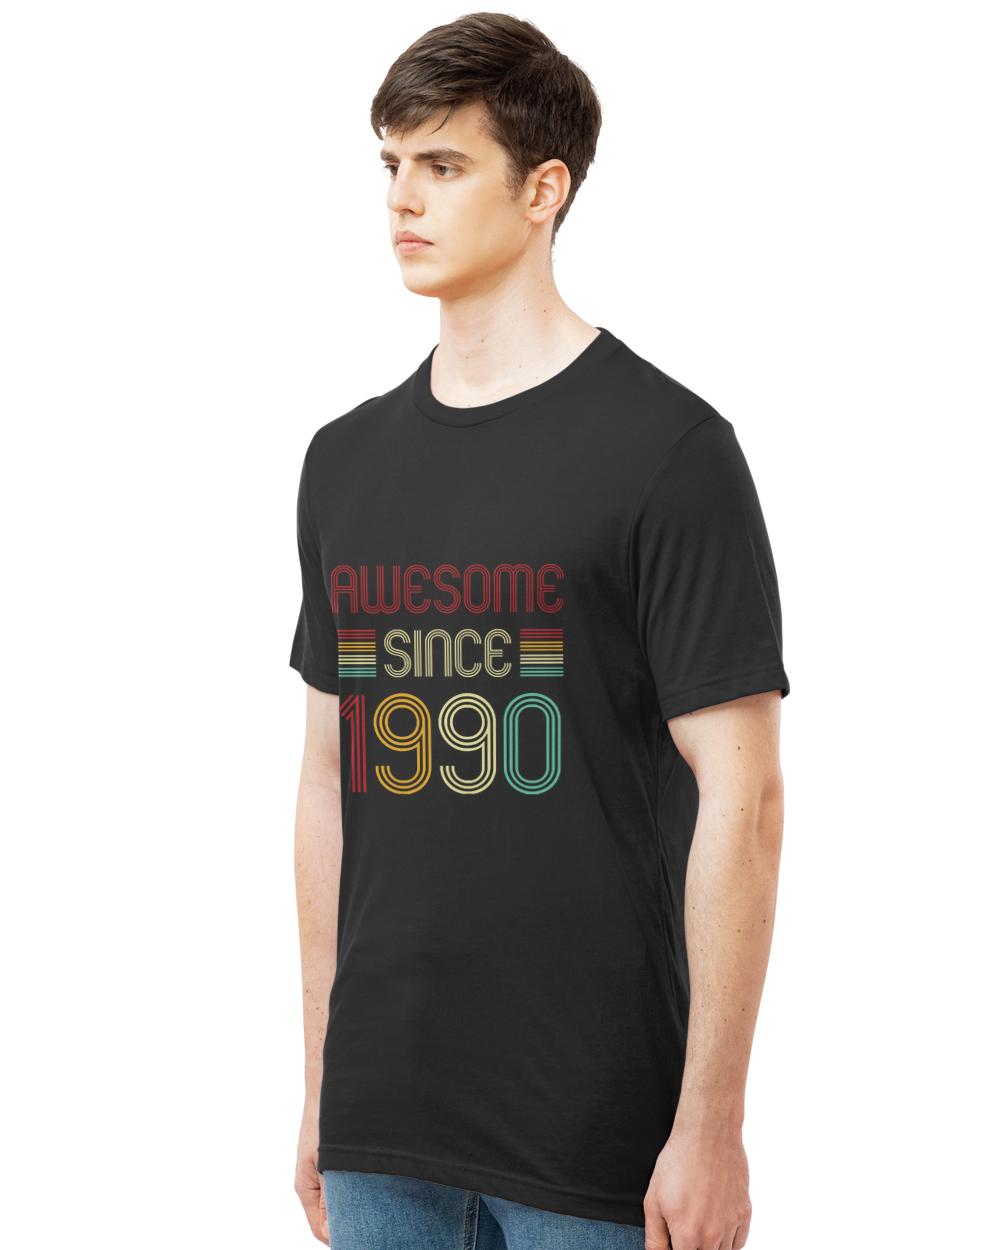 Vintage Awesome Since 1990 T-ShirtVintage Awesome Since 1990 T-Shirt